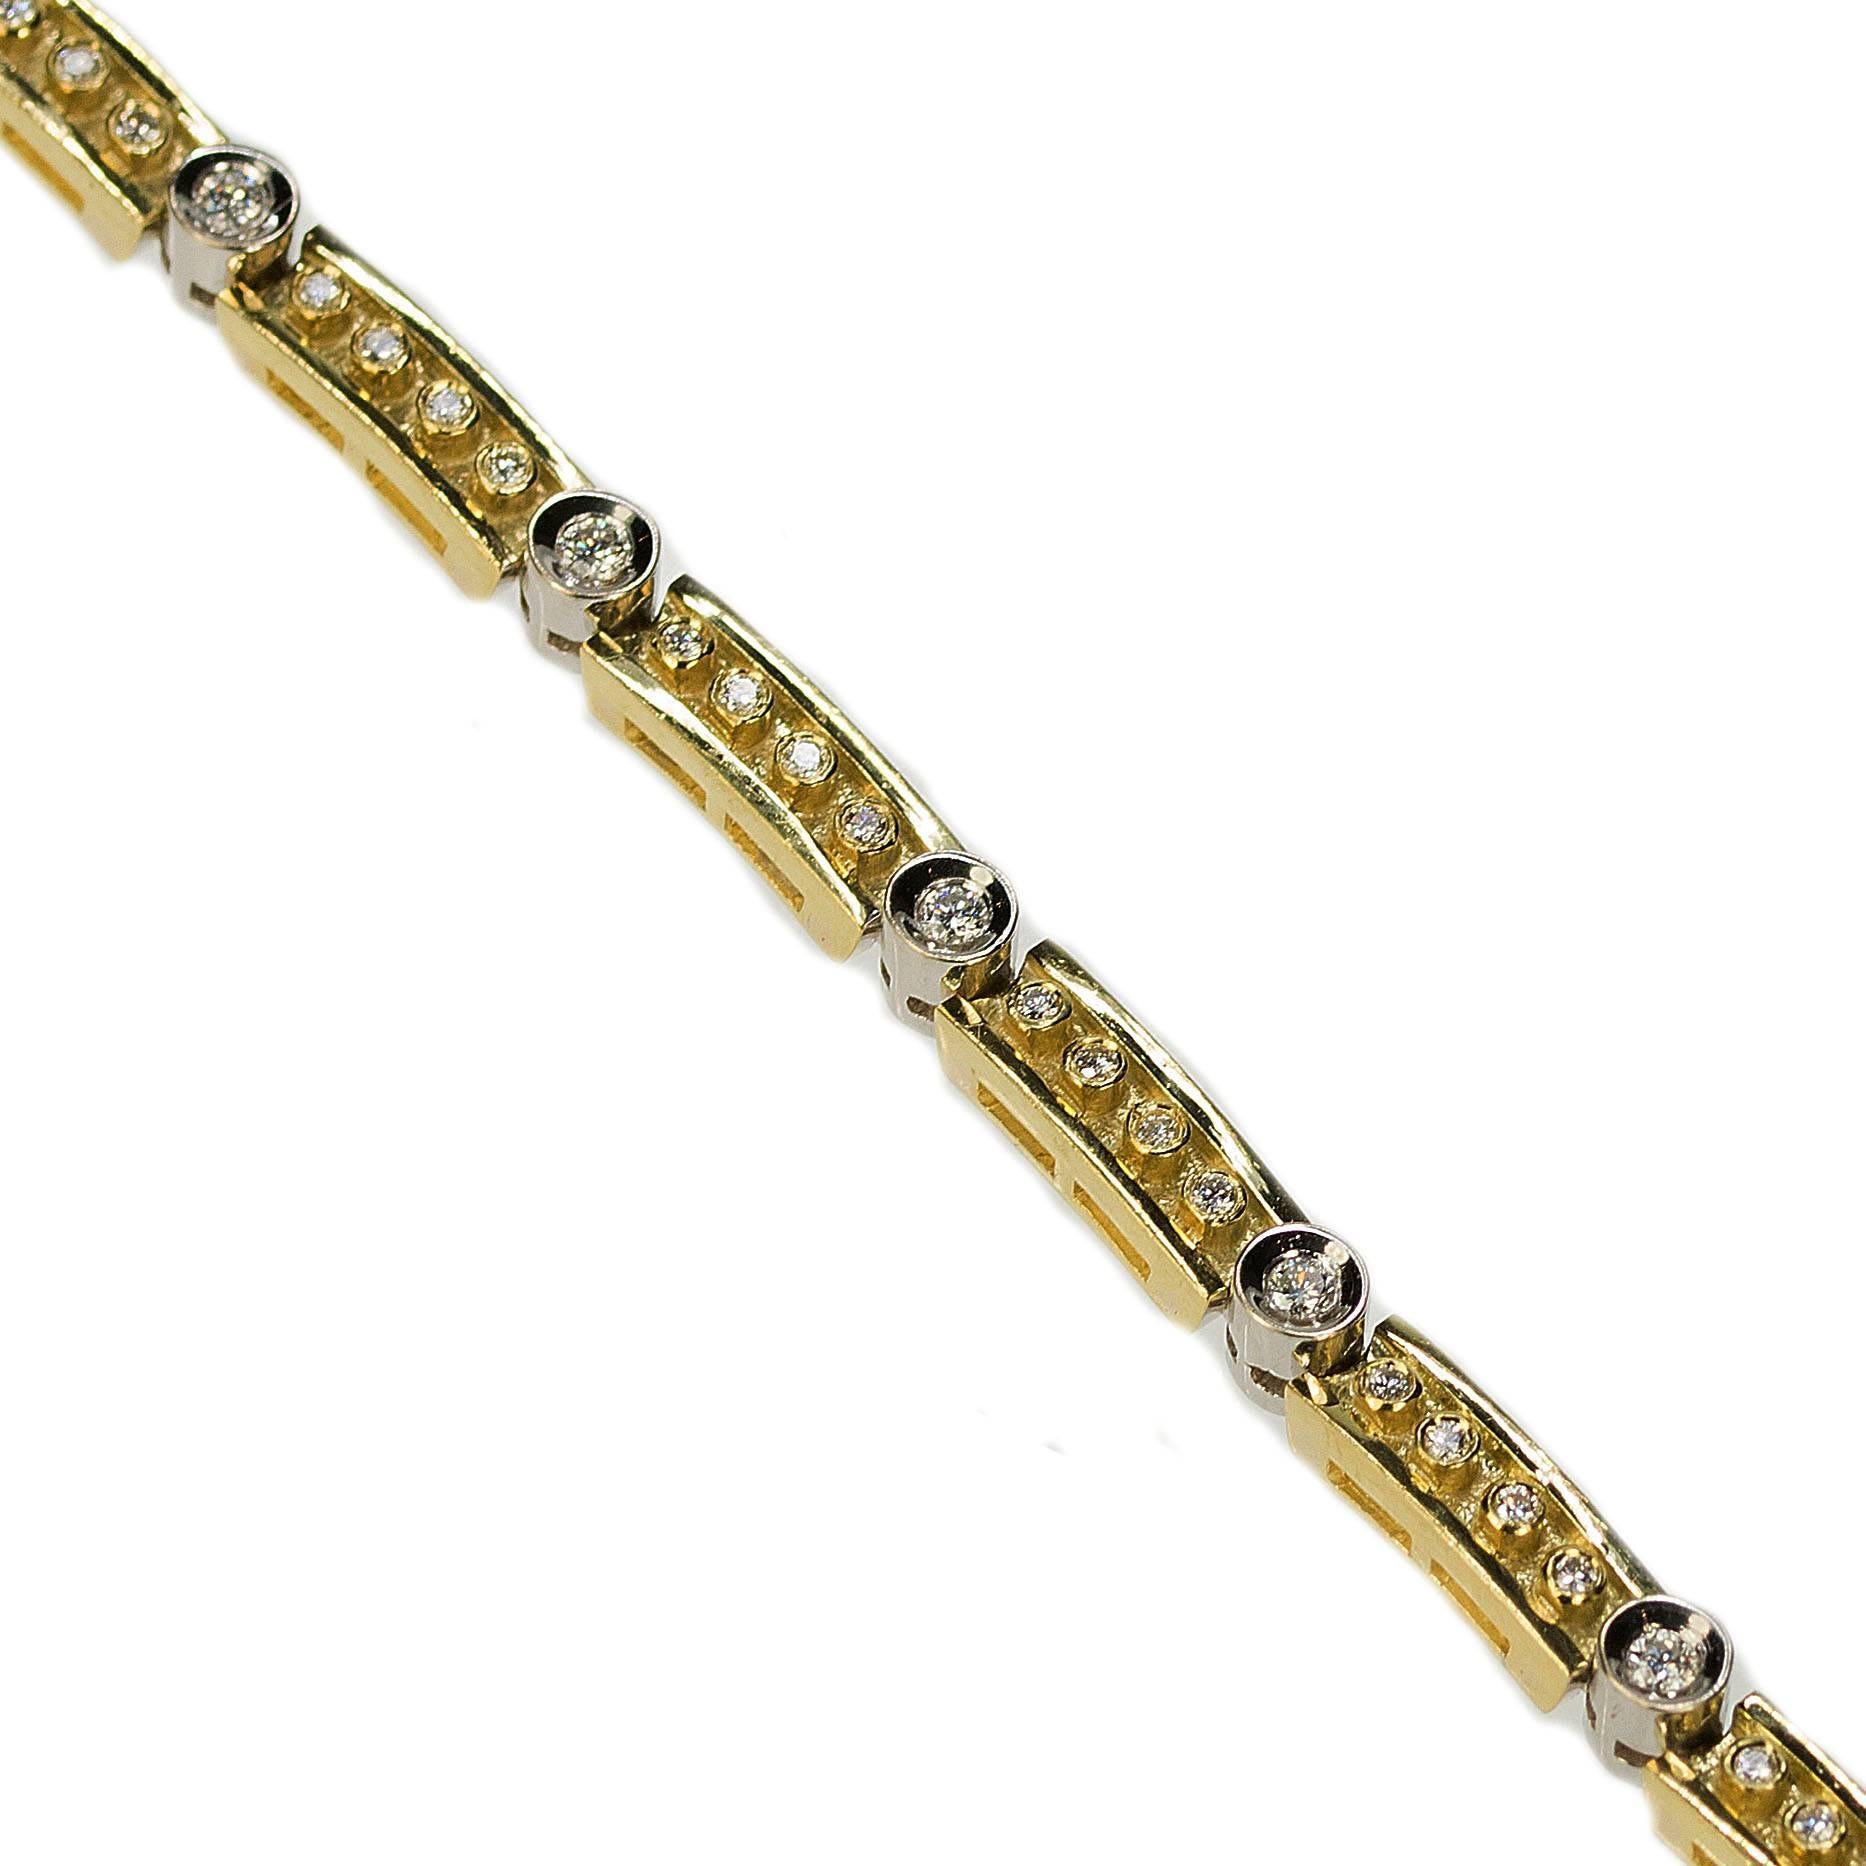 18k Yellow & White Gold Bracelet with 45 modern round brilliant diamonds weighing aproximately 1.60 carats. 31.97g